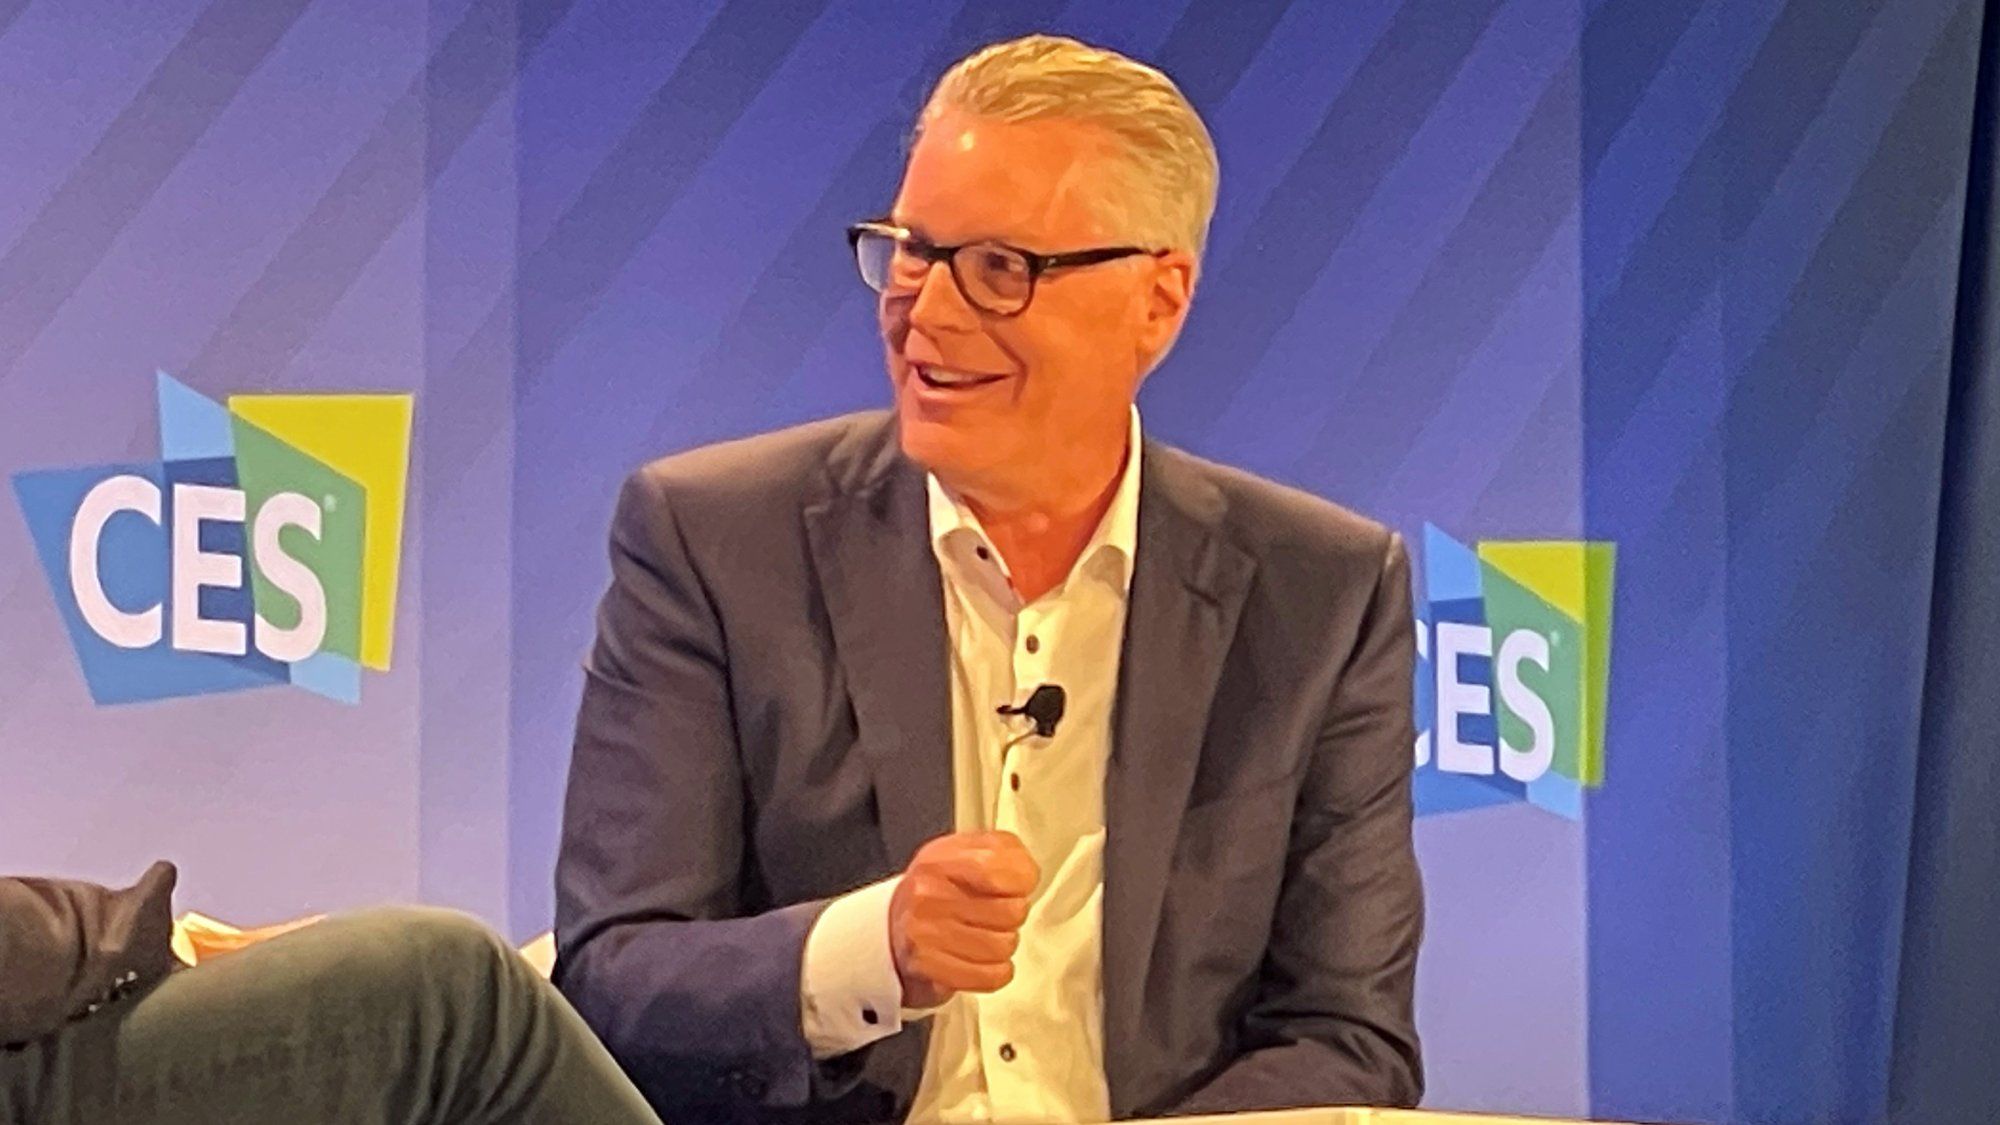 Delta CEO Ed Bastian at the CES conference in Las Vegas on Jan. 5.